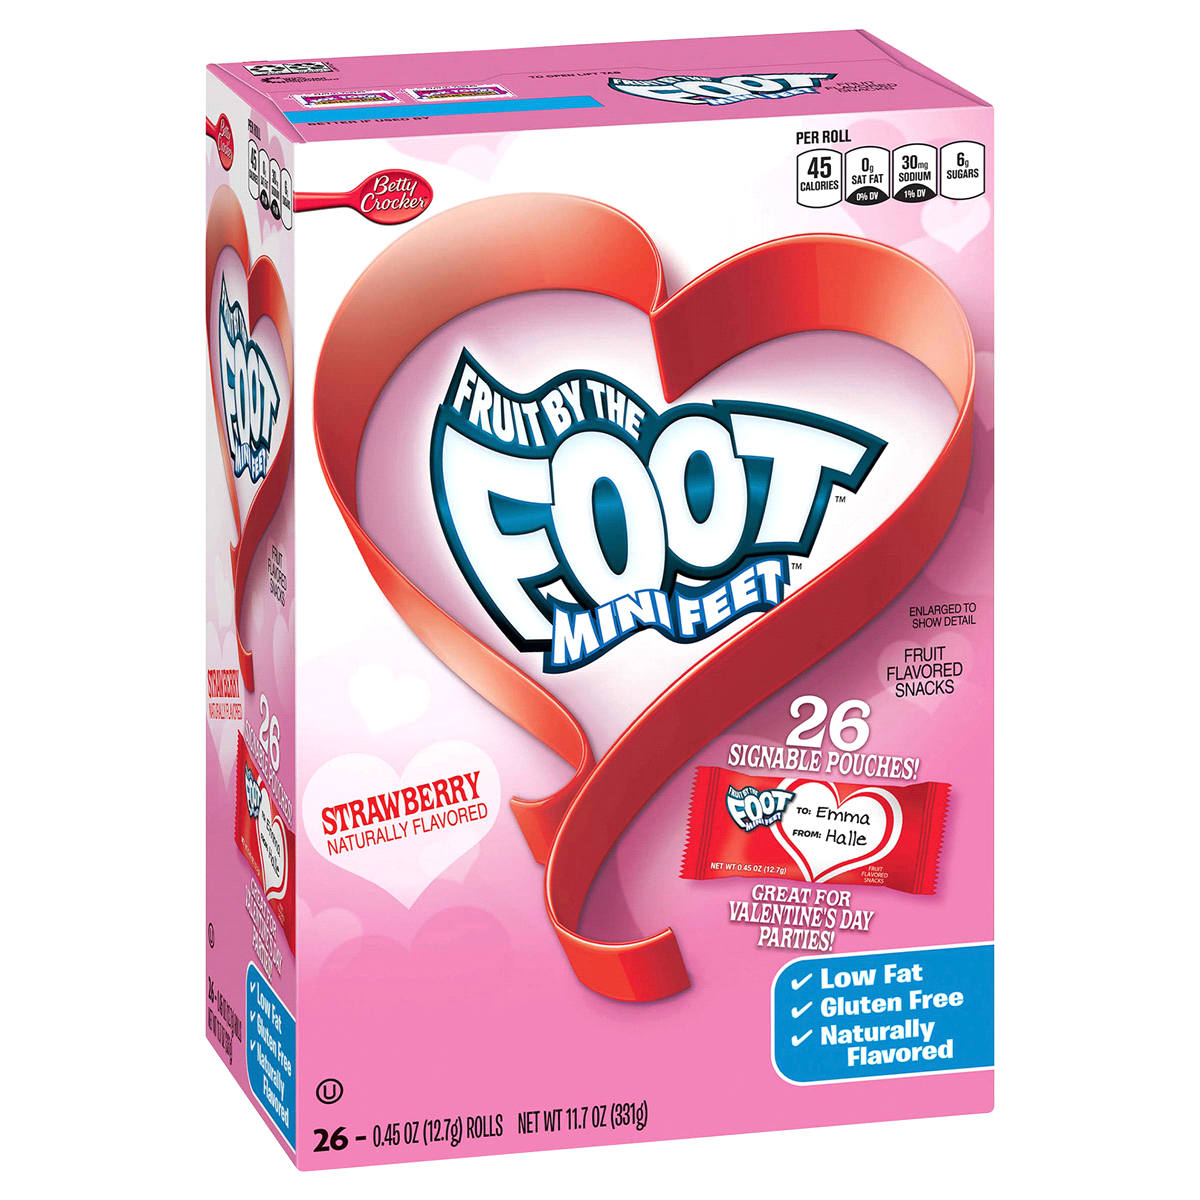 slide 1 of 1, Fruit by the Foot Mini Feet Strawberry Fruit Flavored Snacks, 26 ct; 0.45 oz